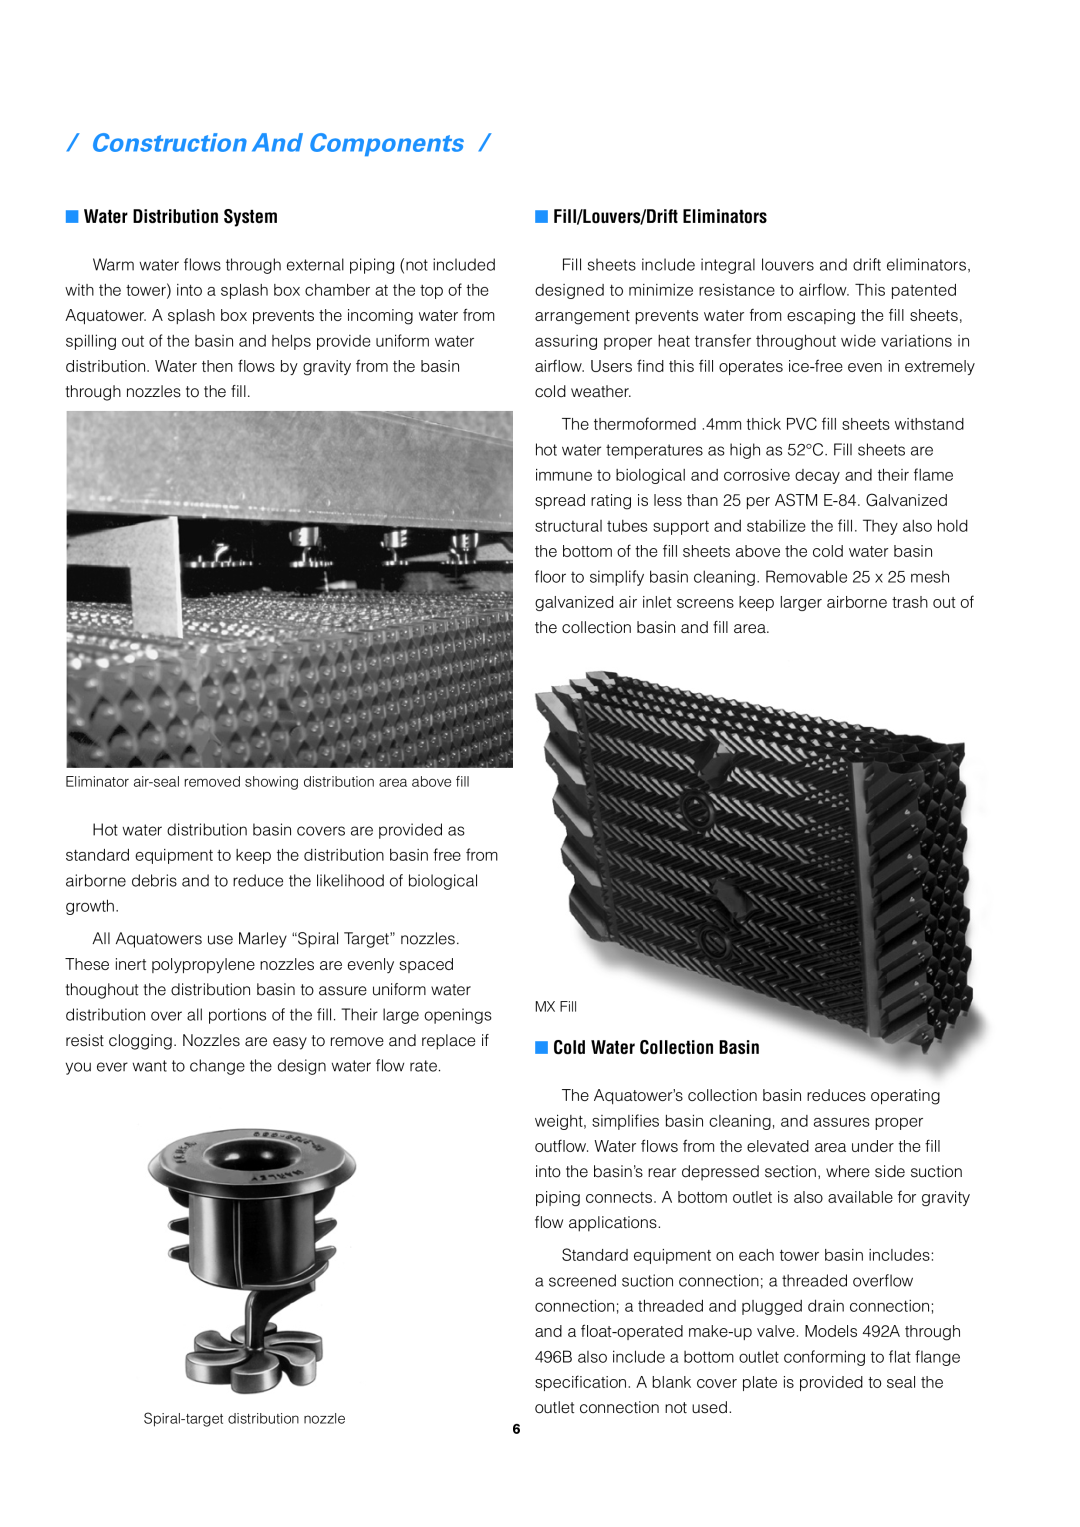 SPX Cooling Technologies Marley Aquatower manual Construction And Components, Water Distribution System 